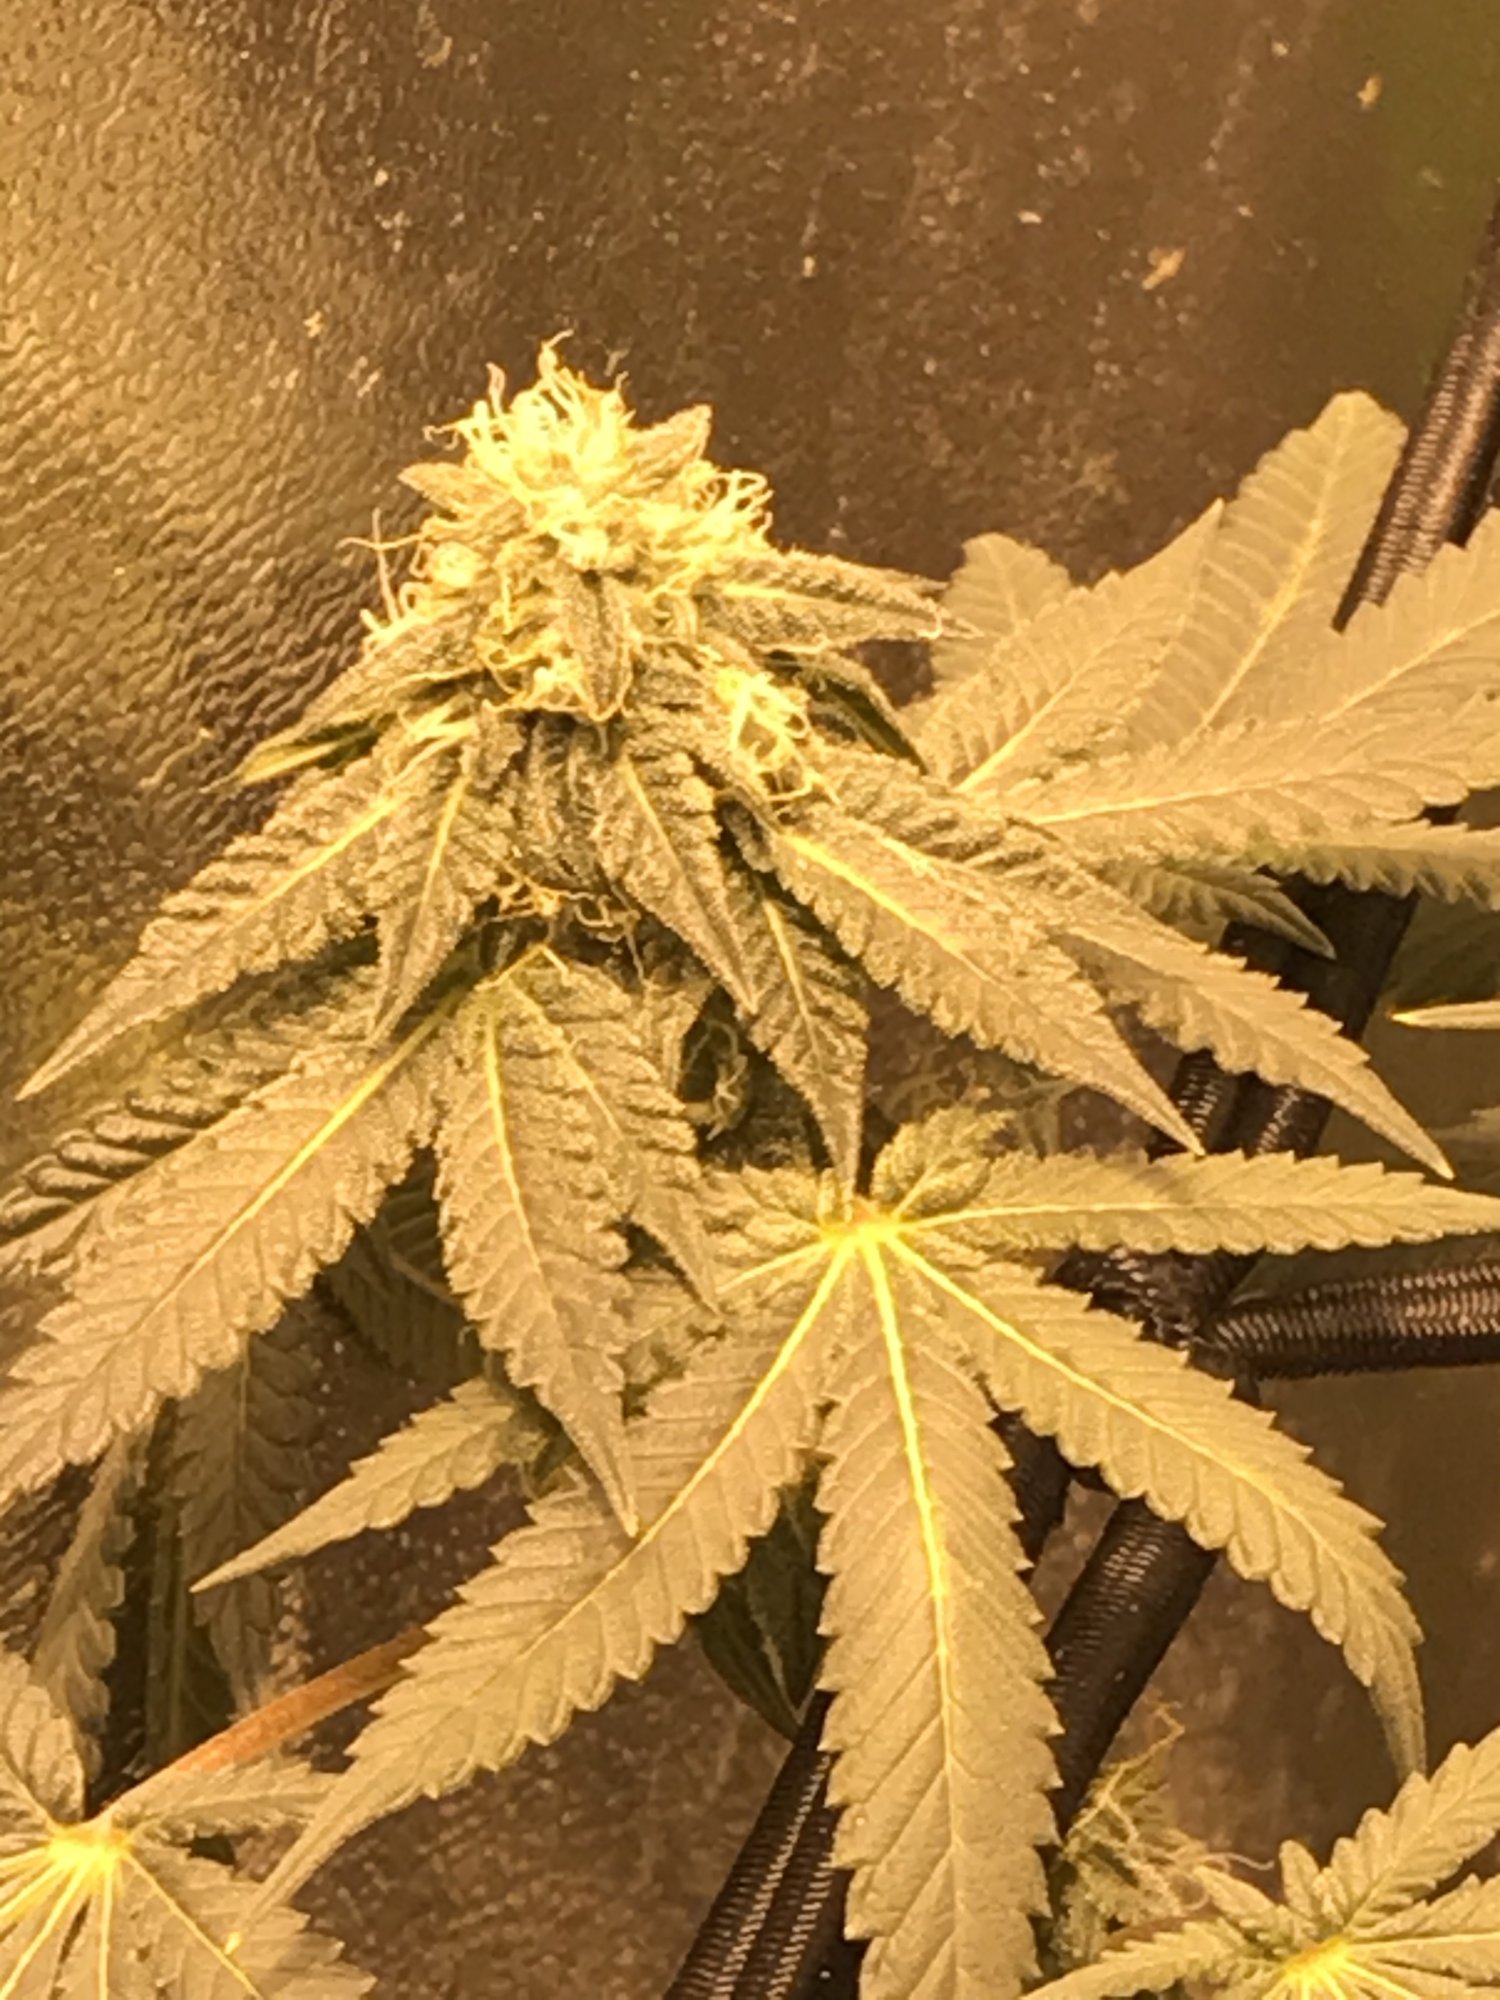 Hey this is latest grow